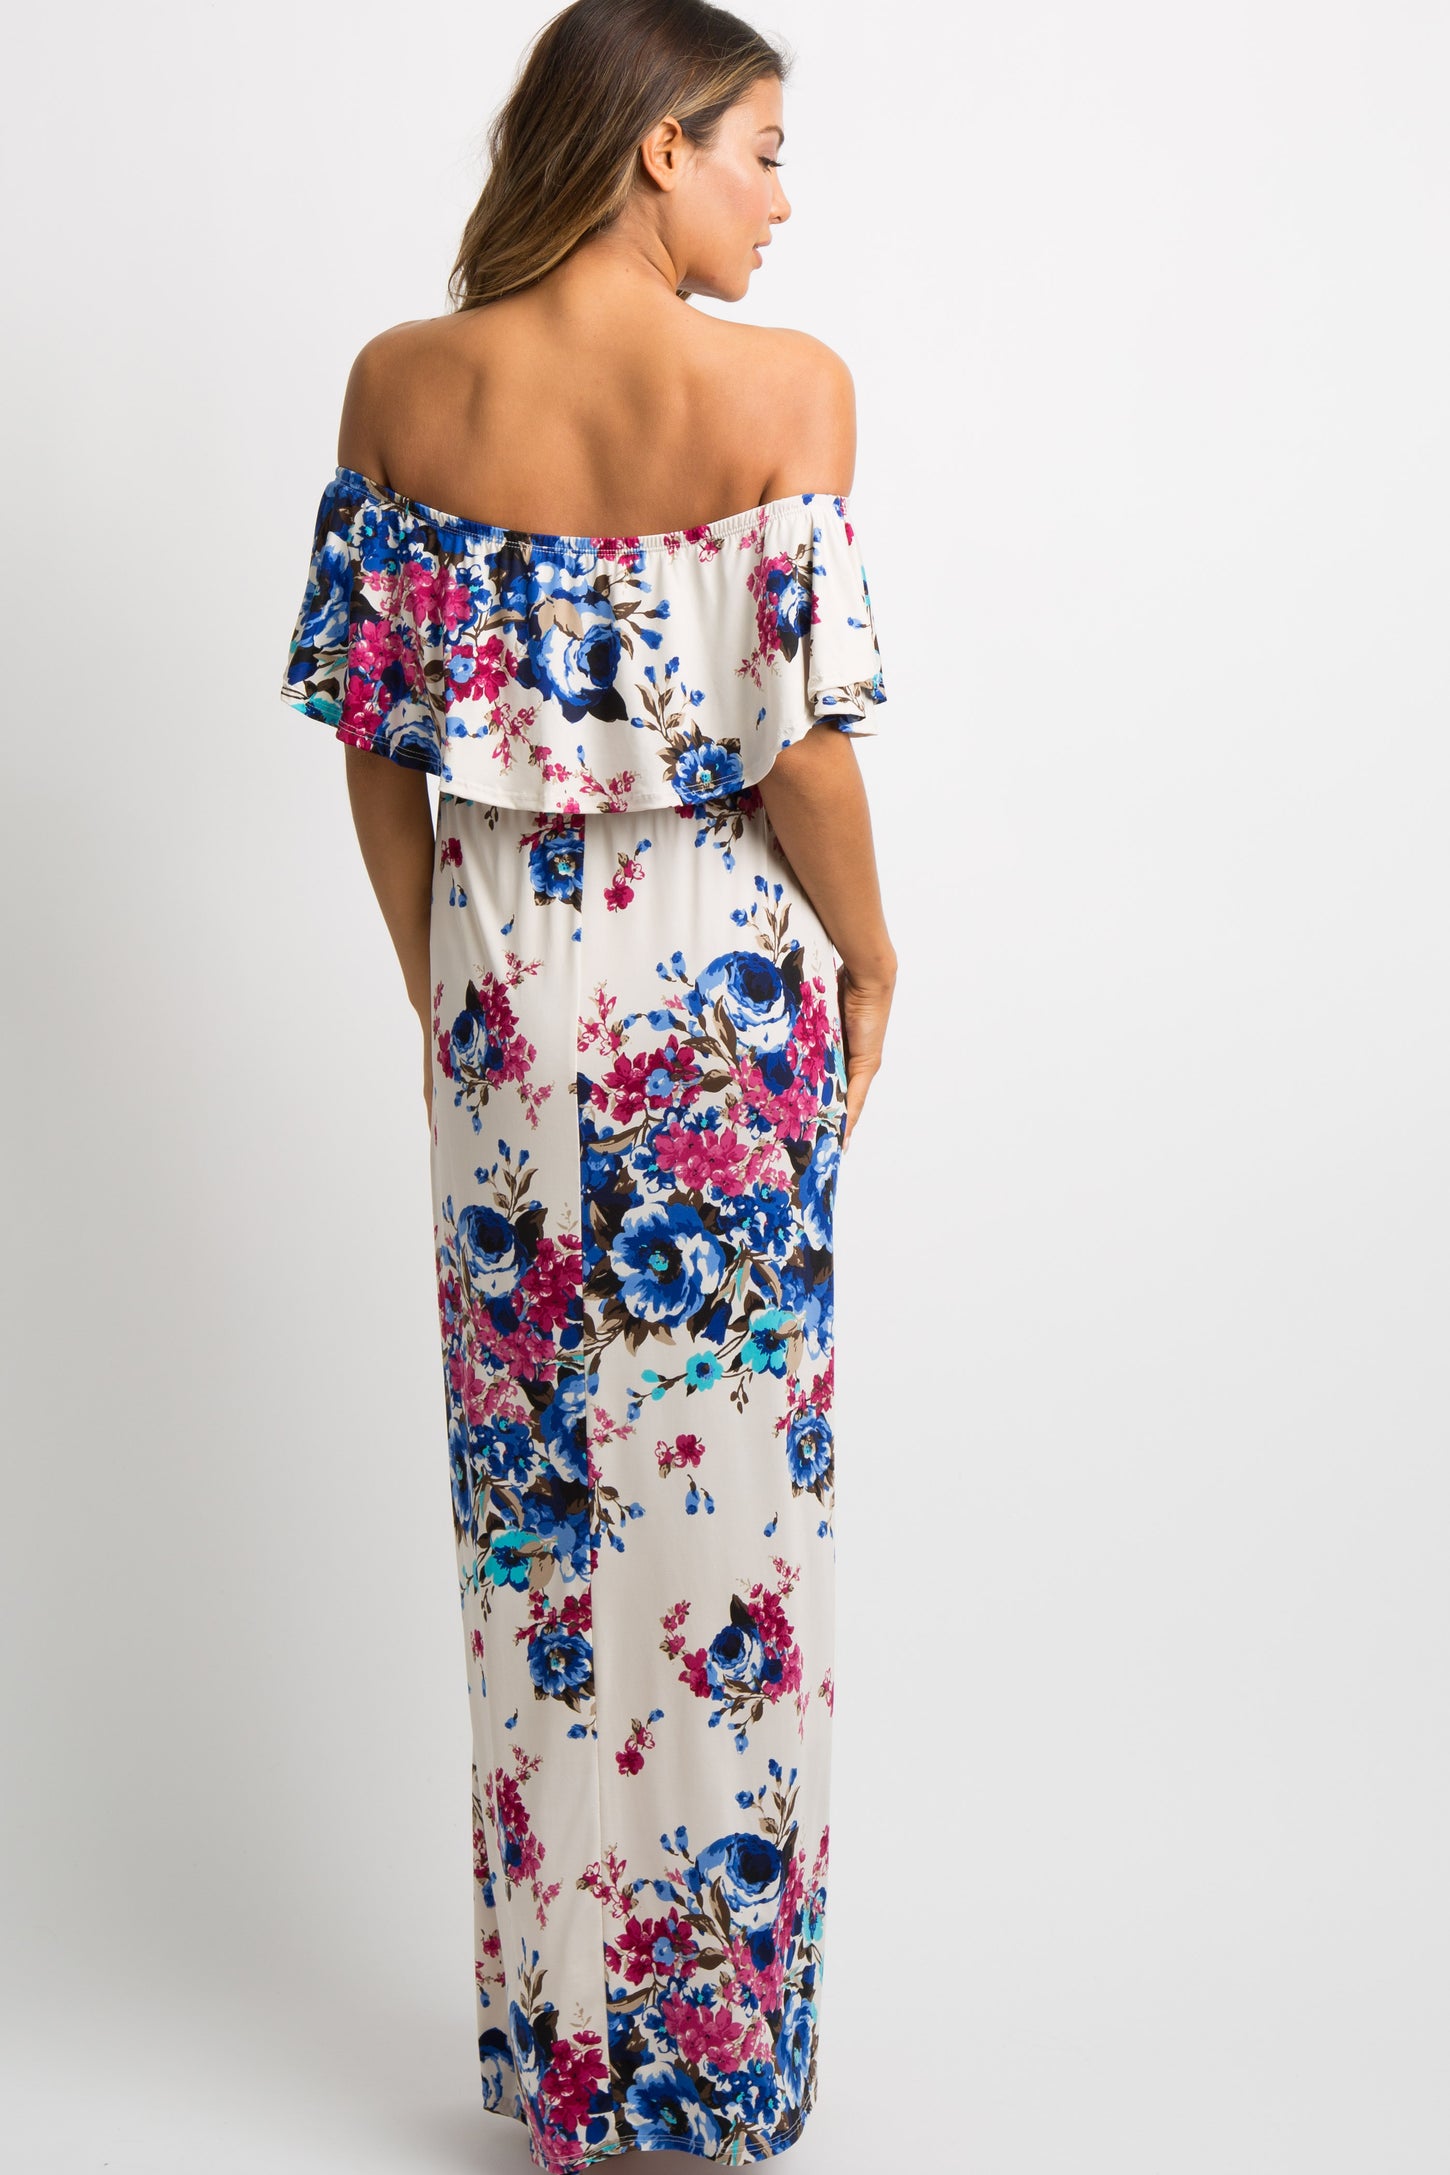 PinkBlush Ivory Floral Ruffle Off Shoulder Maxi Dress